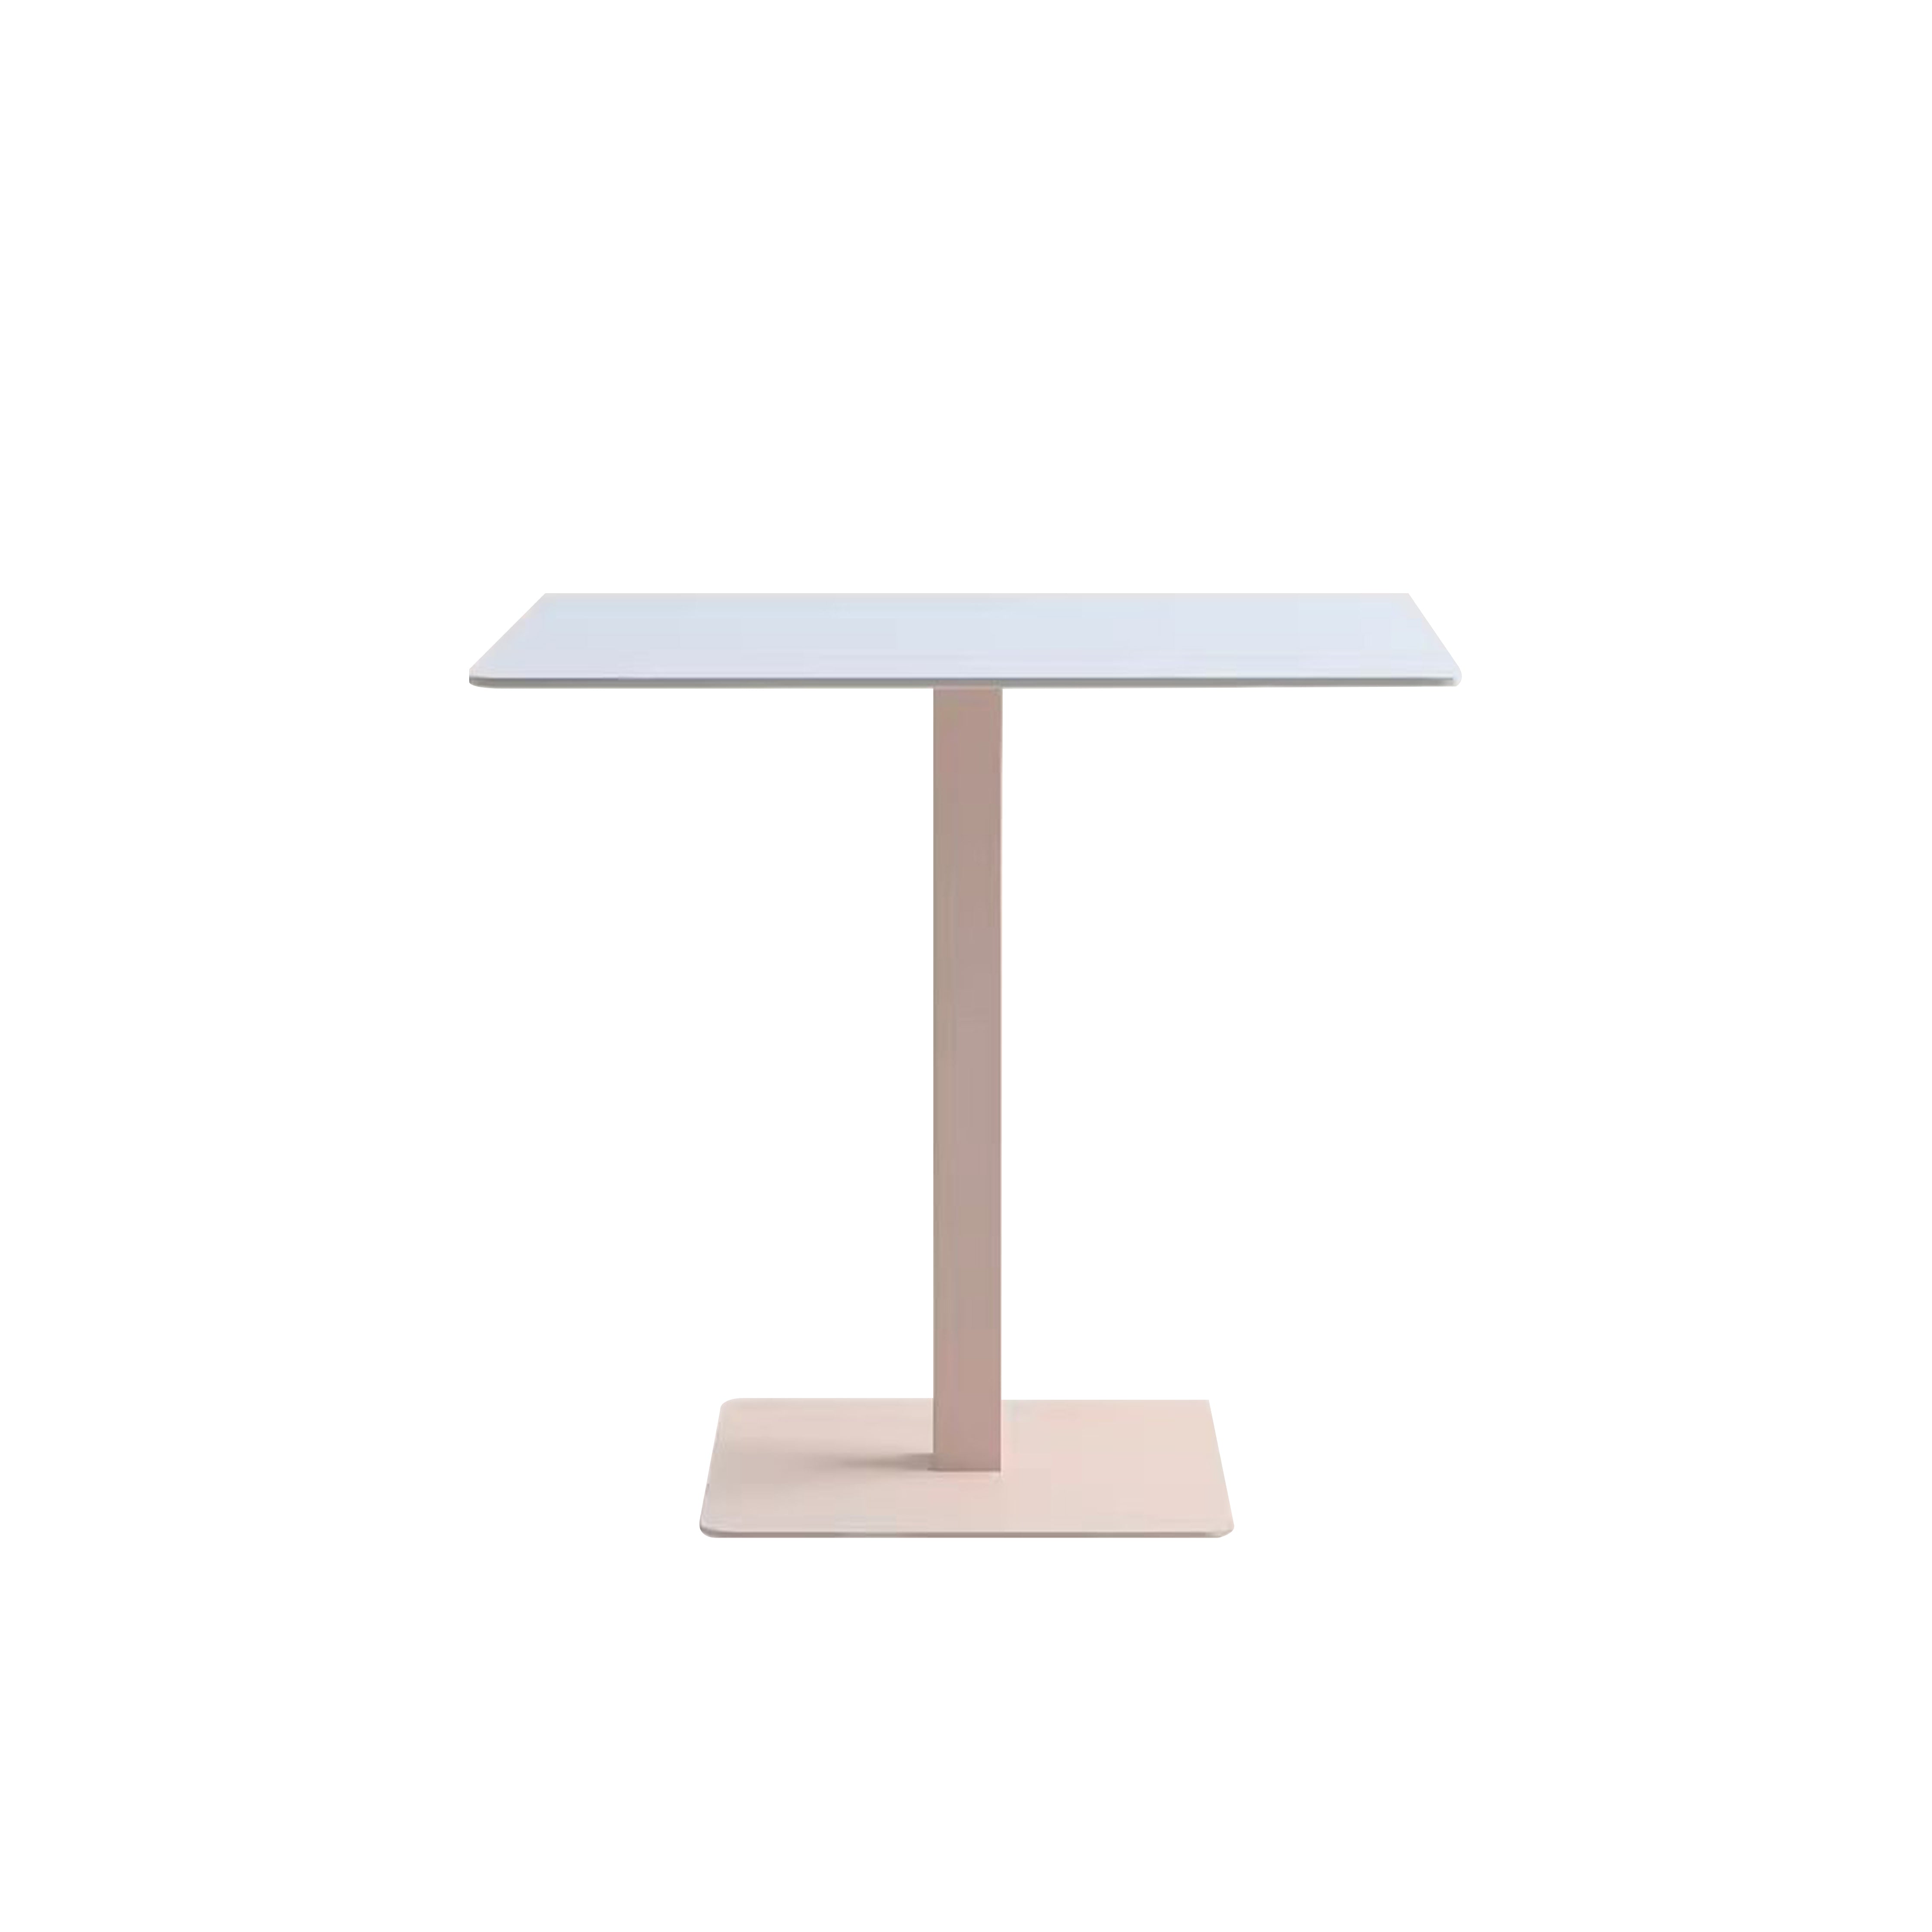 9.0 Table - Sintered Stone Square Dining Table